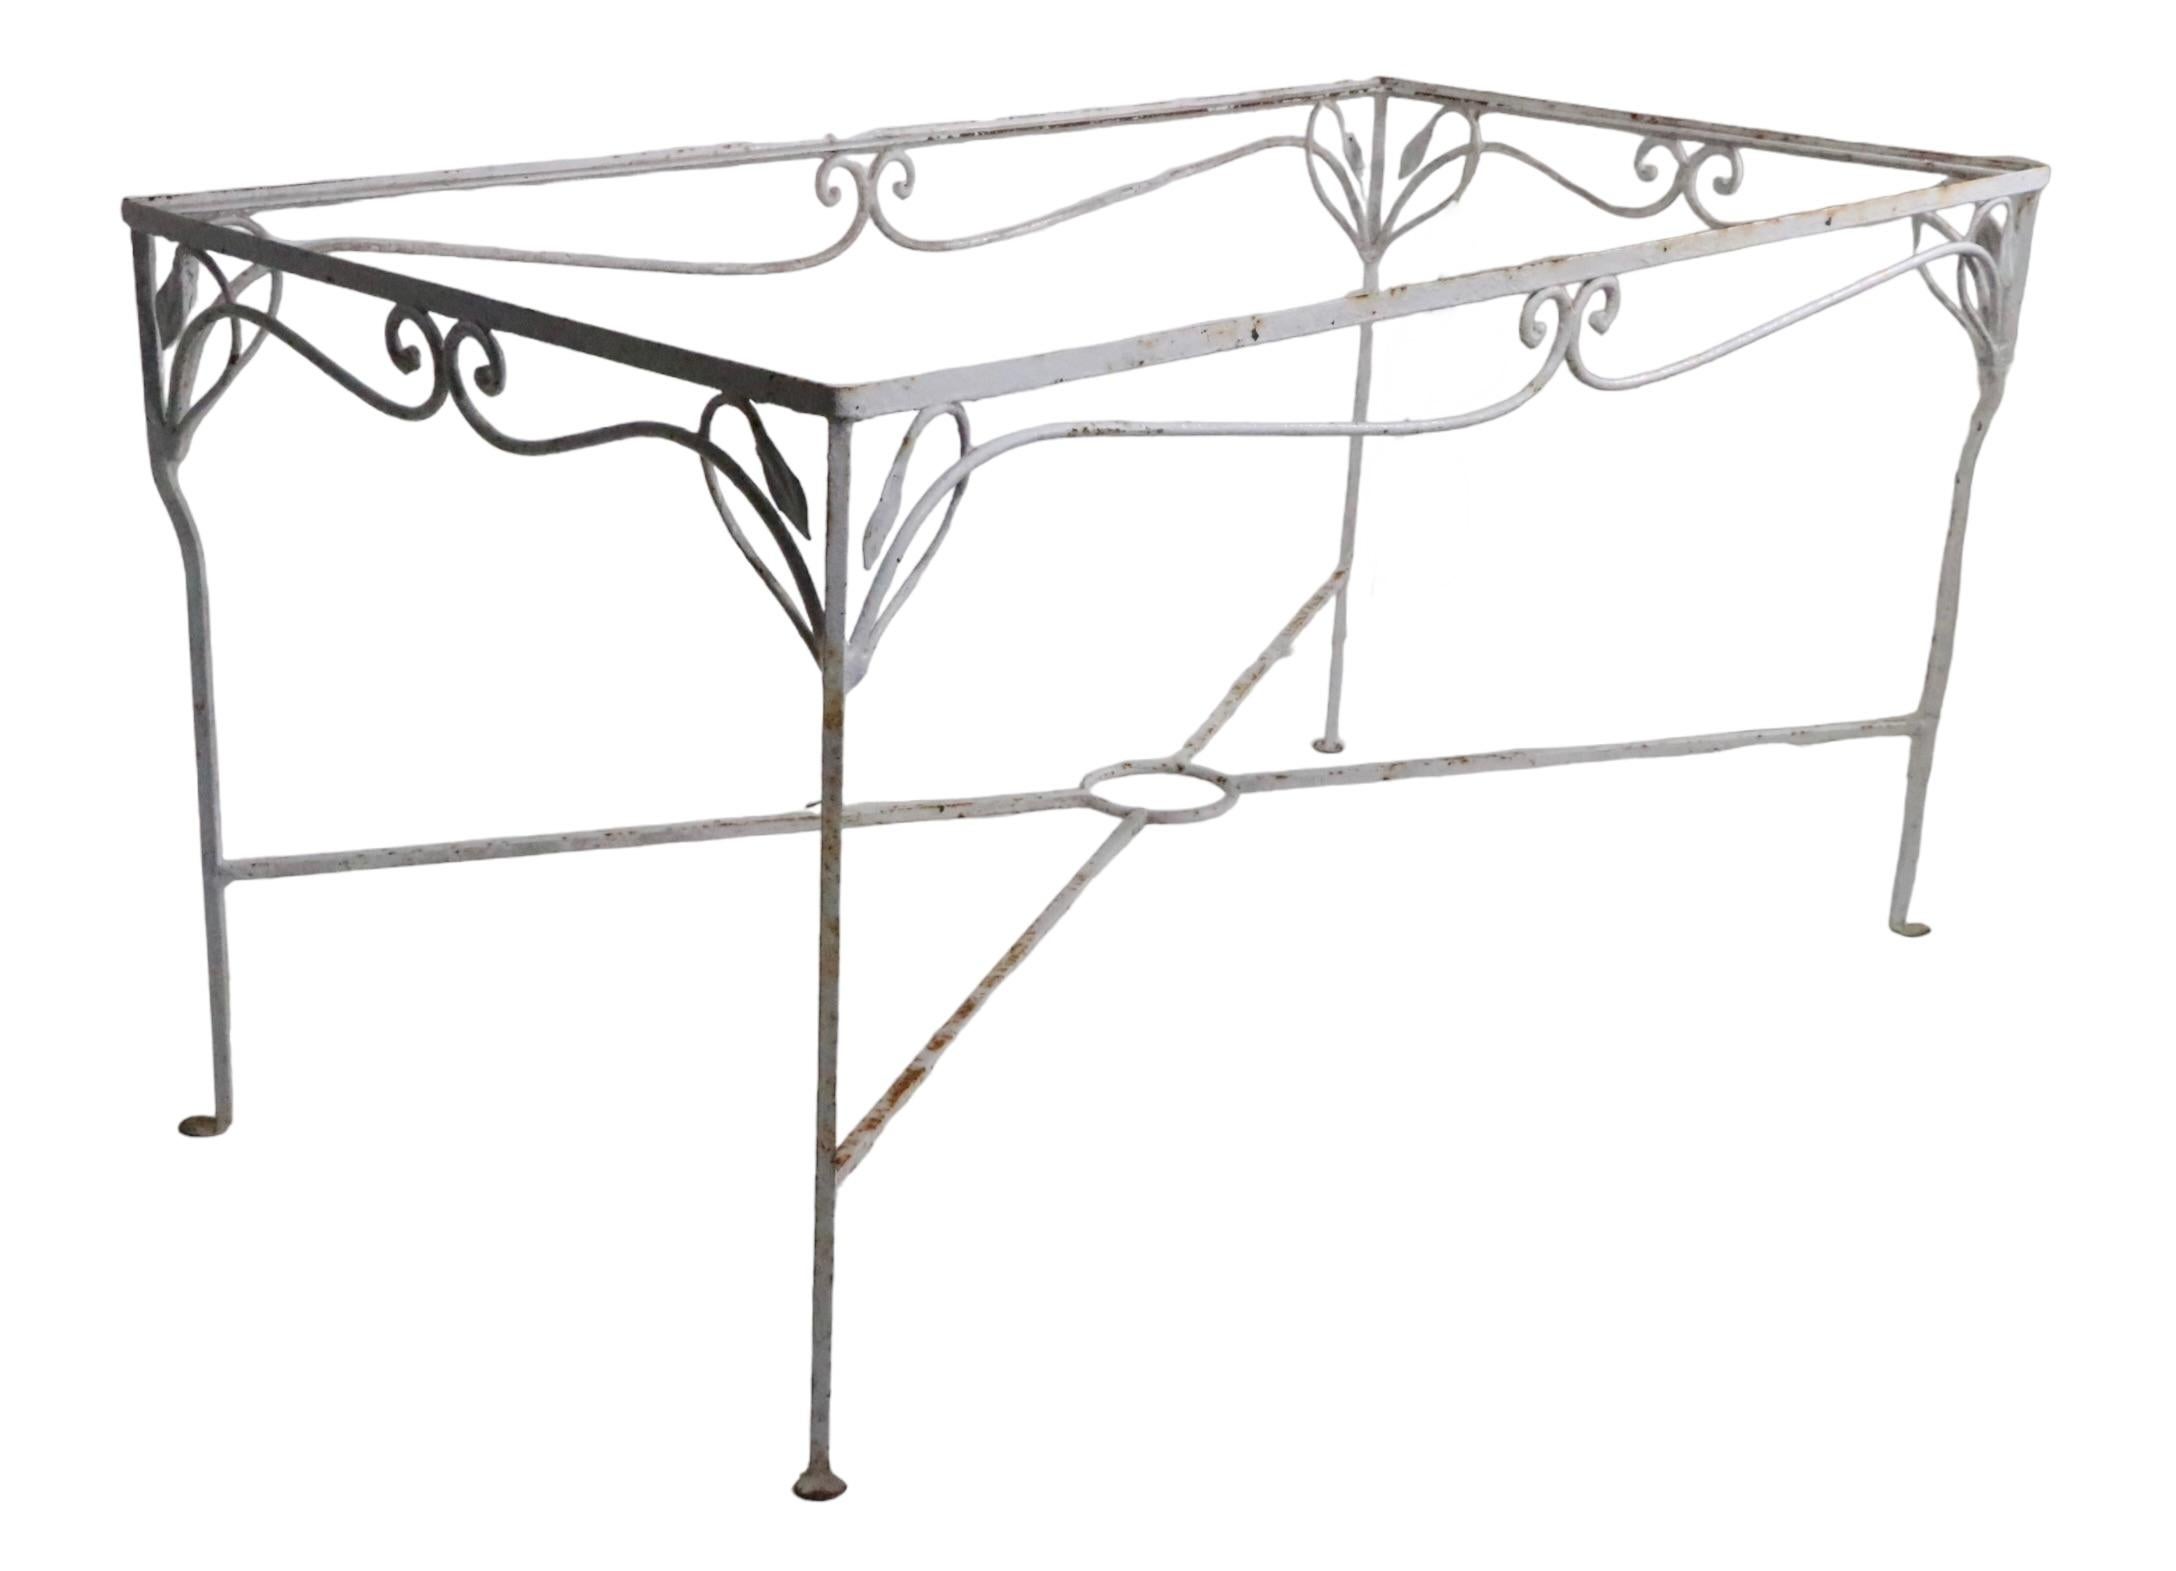 Wrought Iron Garden Patio Poolside Dining Table att. to Woodard c 1930/1950's For Sale 6